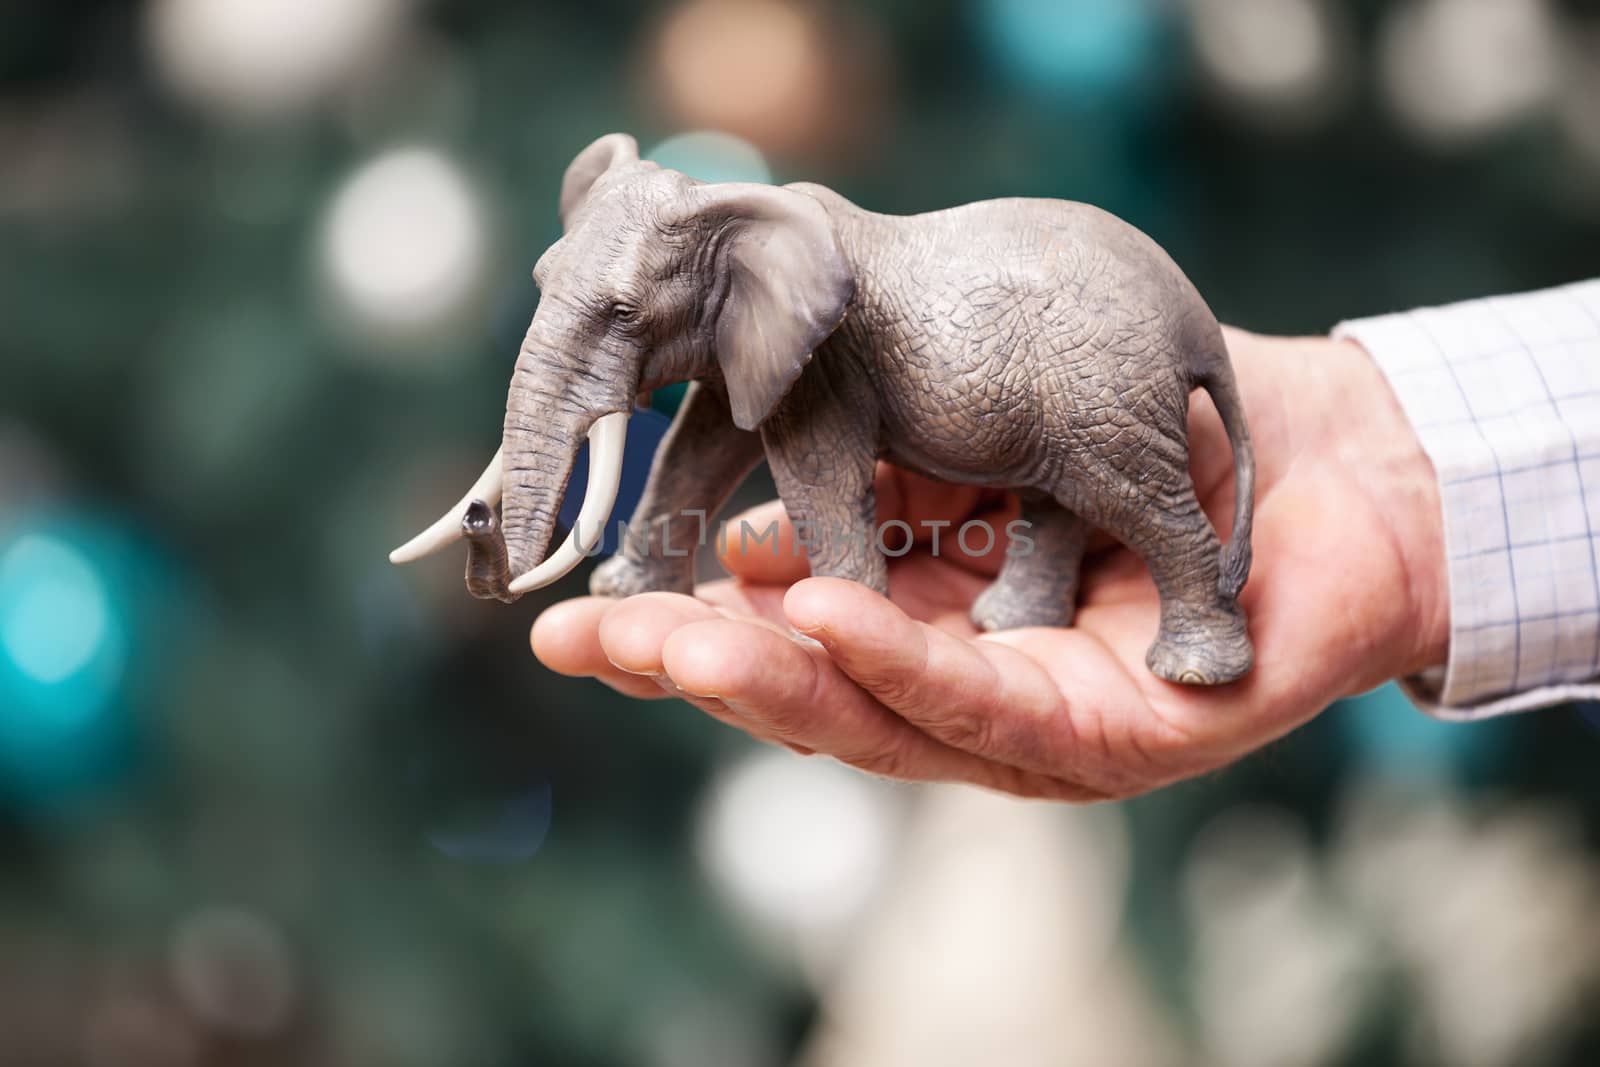 Male hand with toy elephant over Christmas background